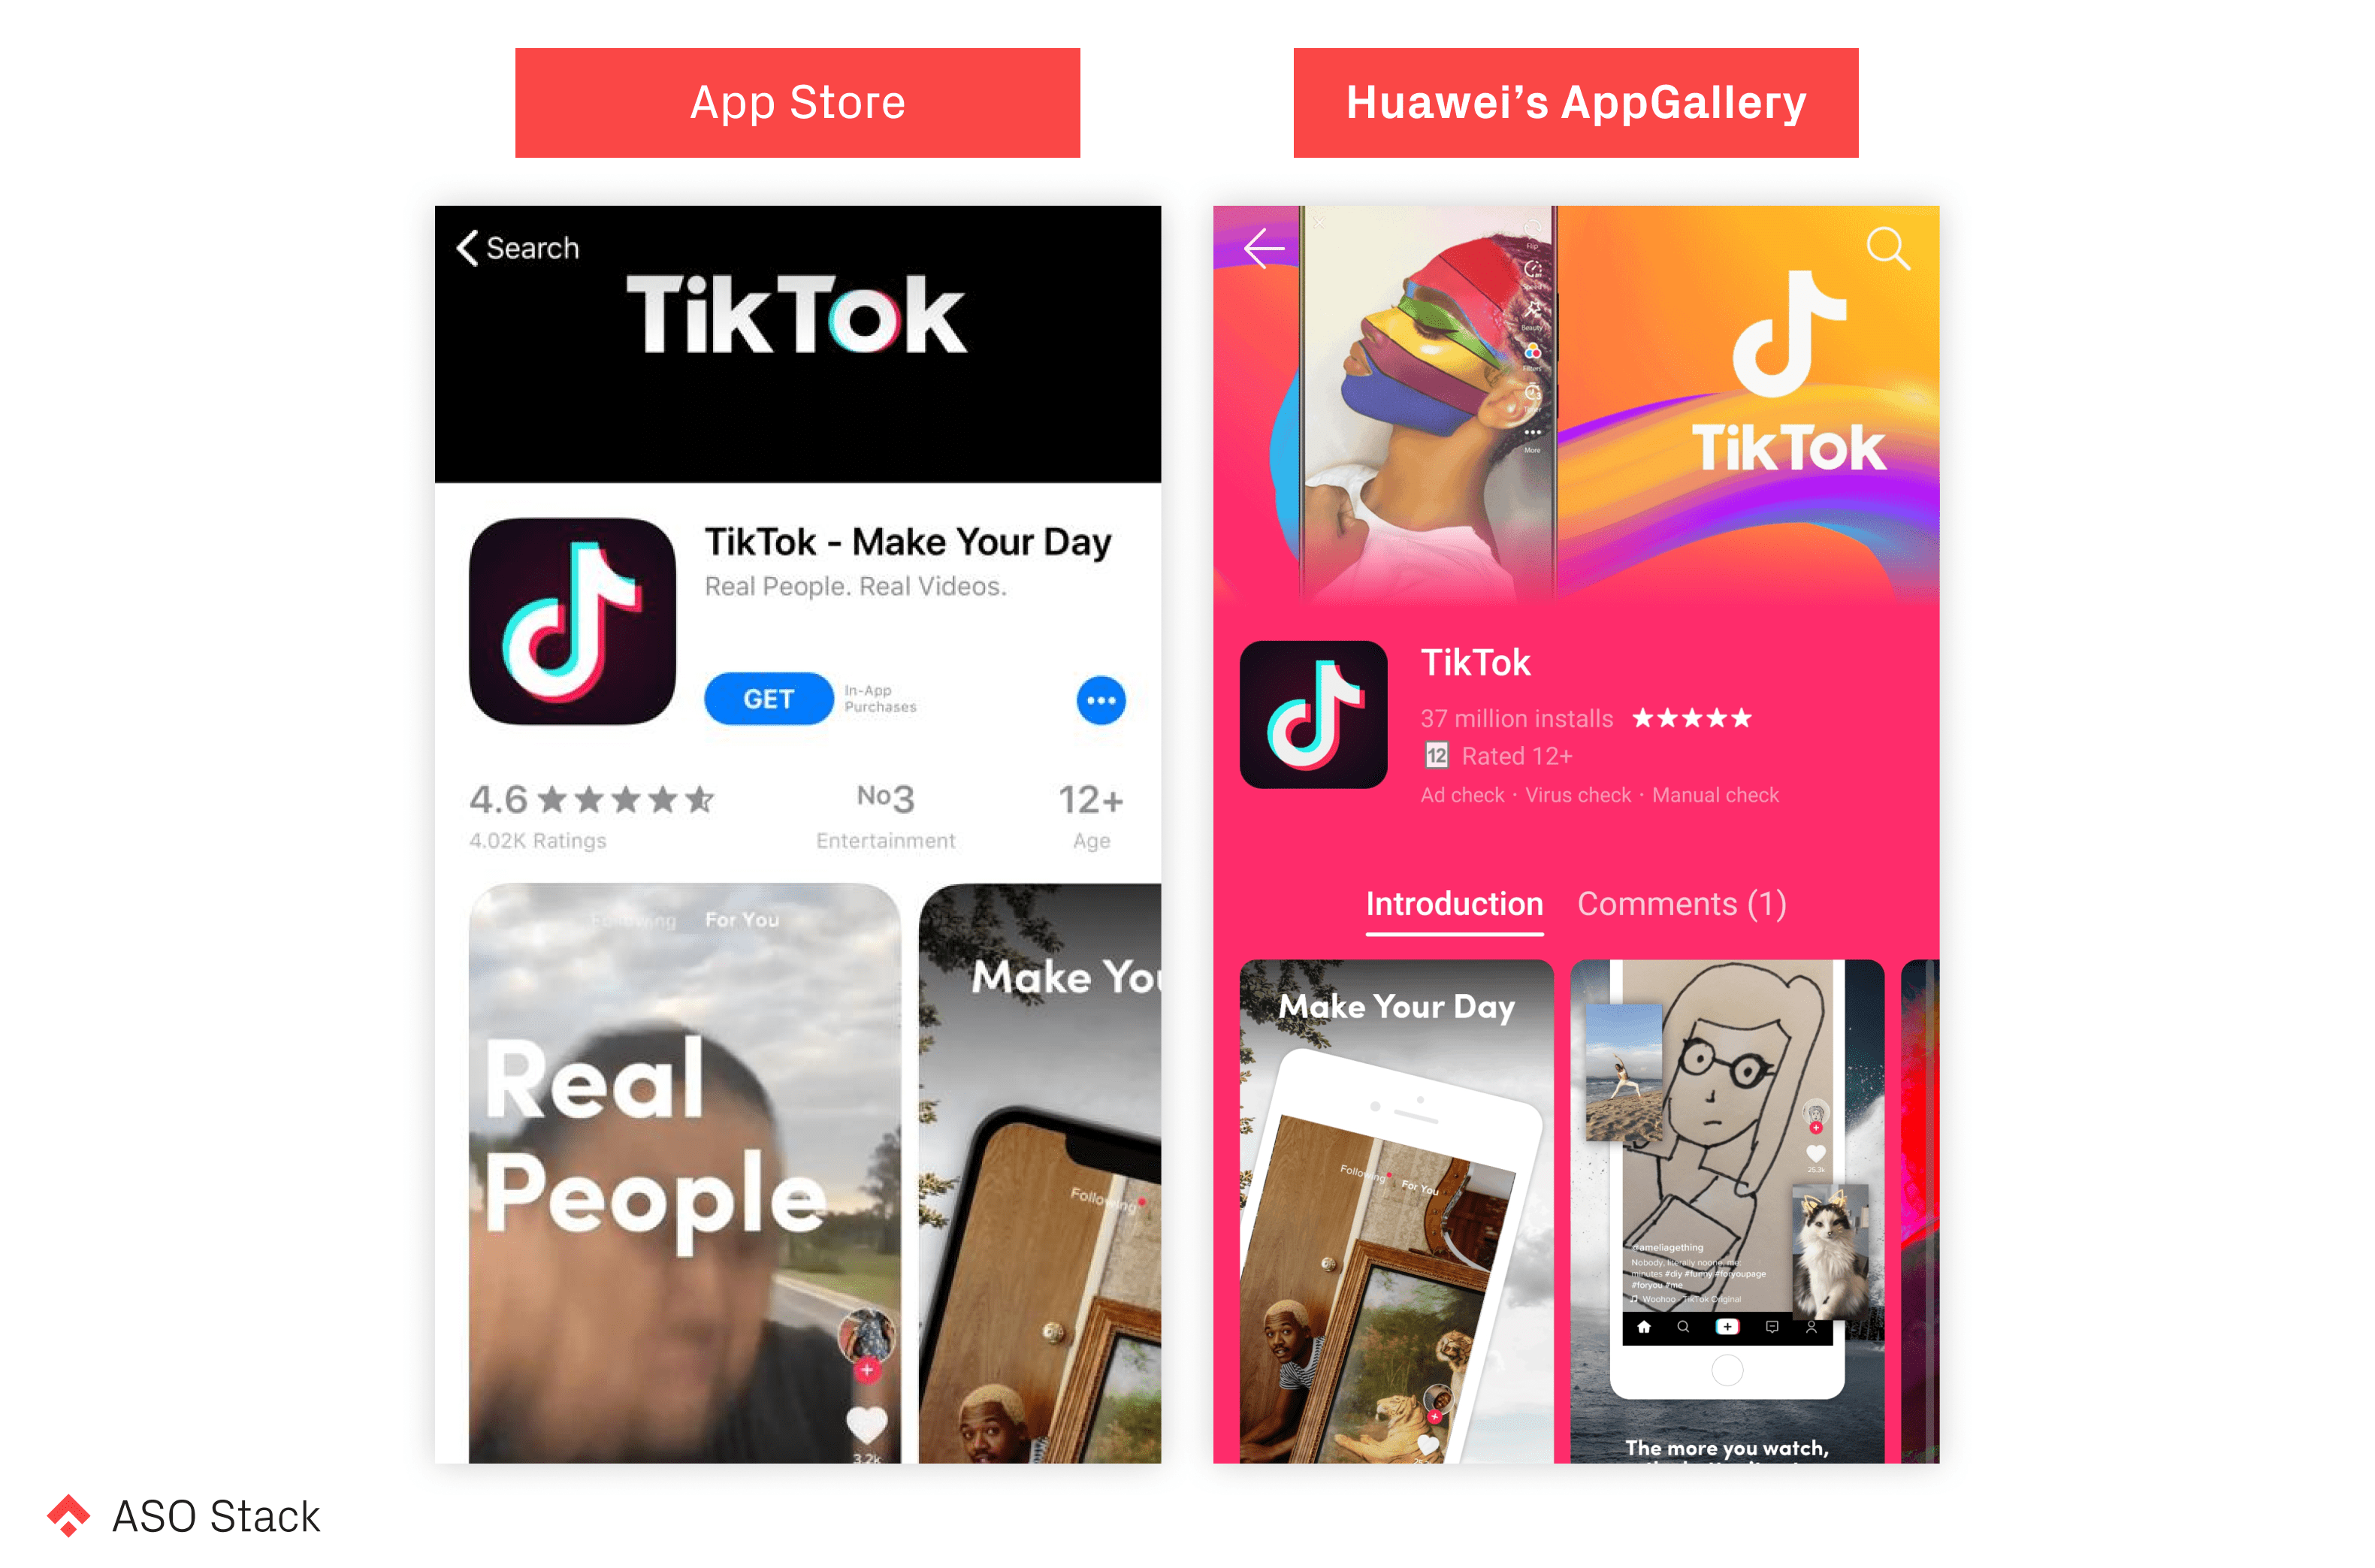 tiktok featured in store listings